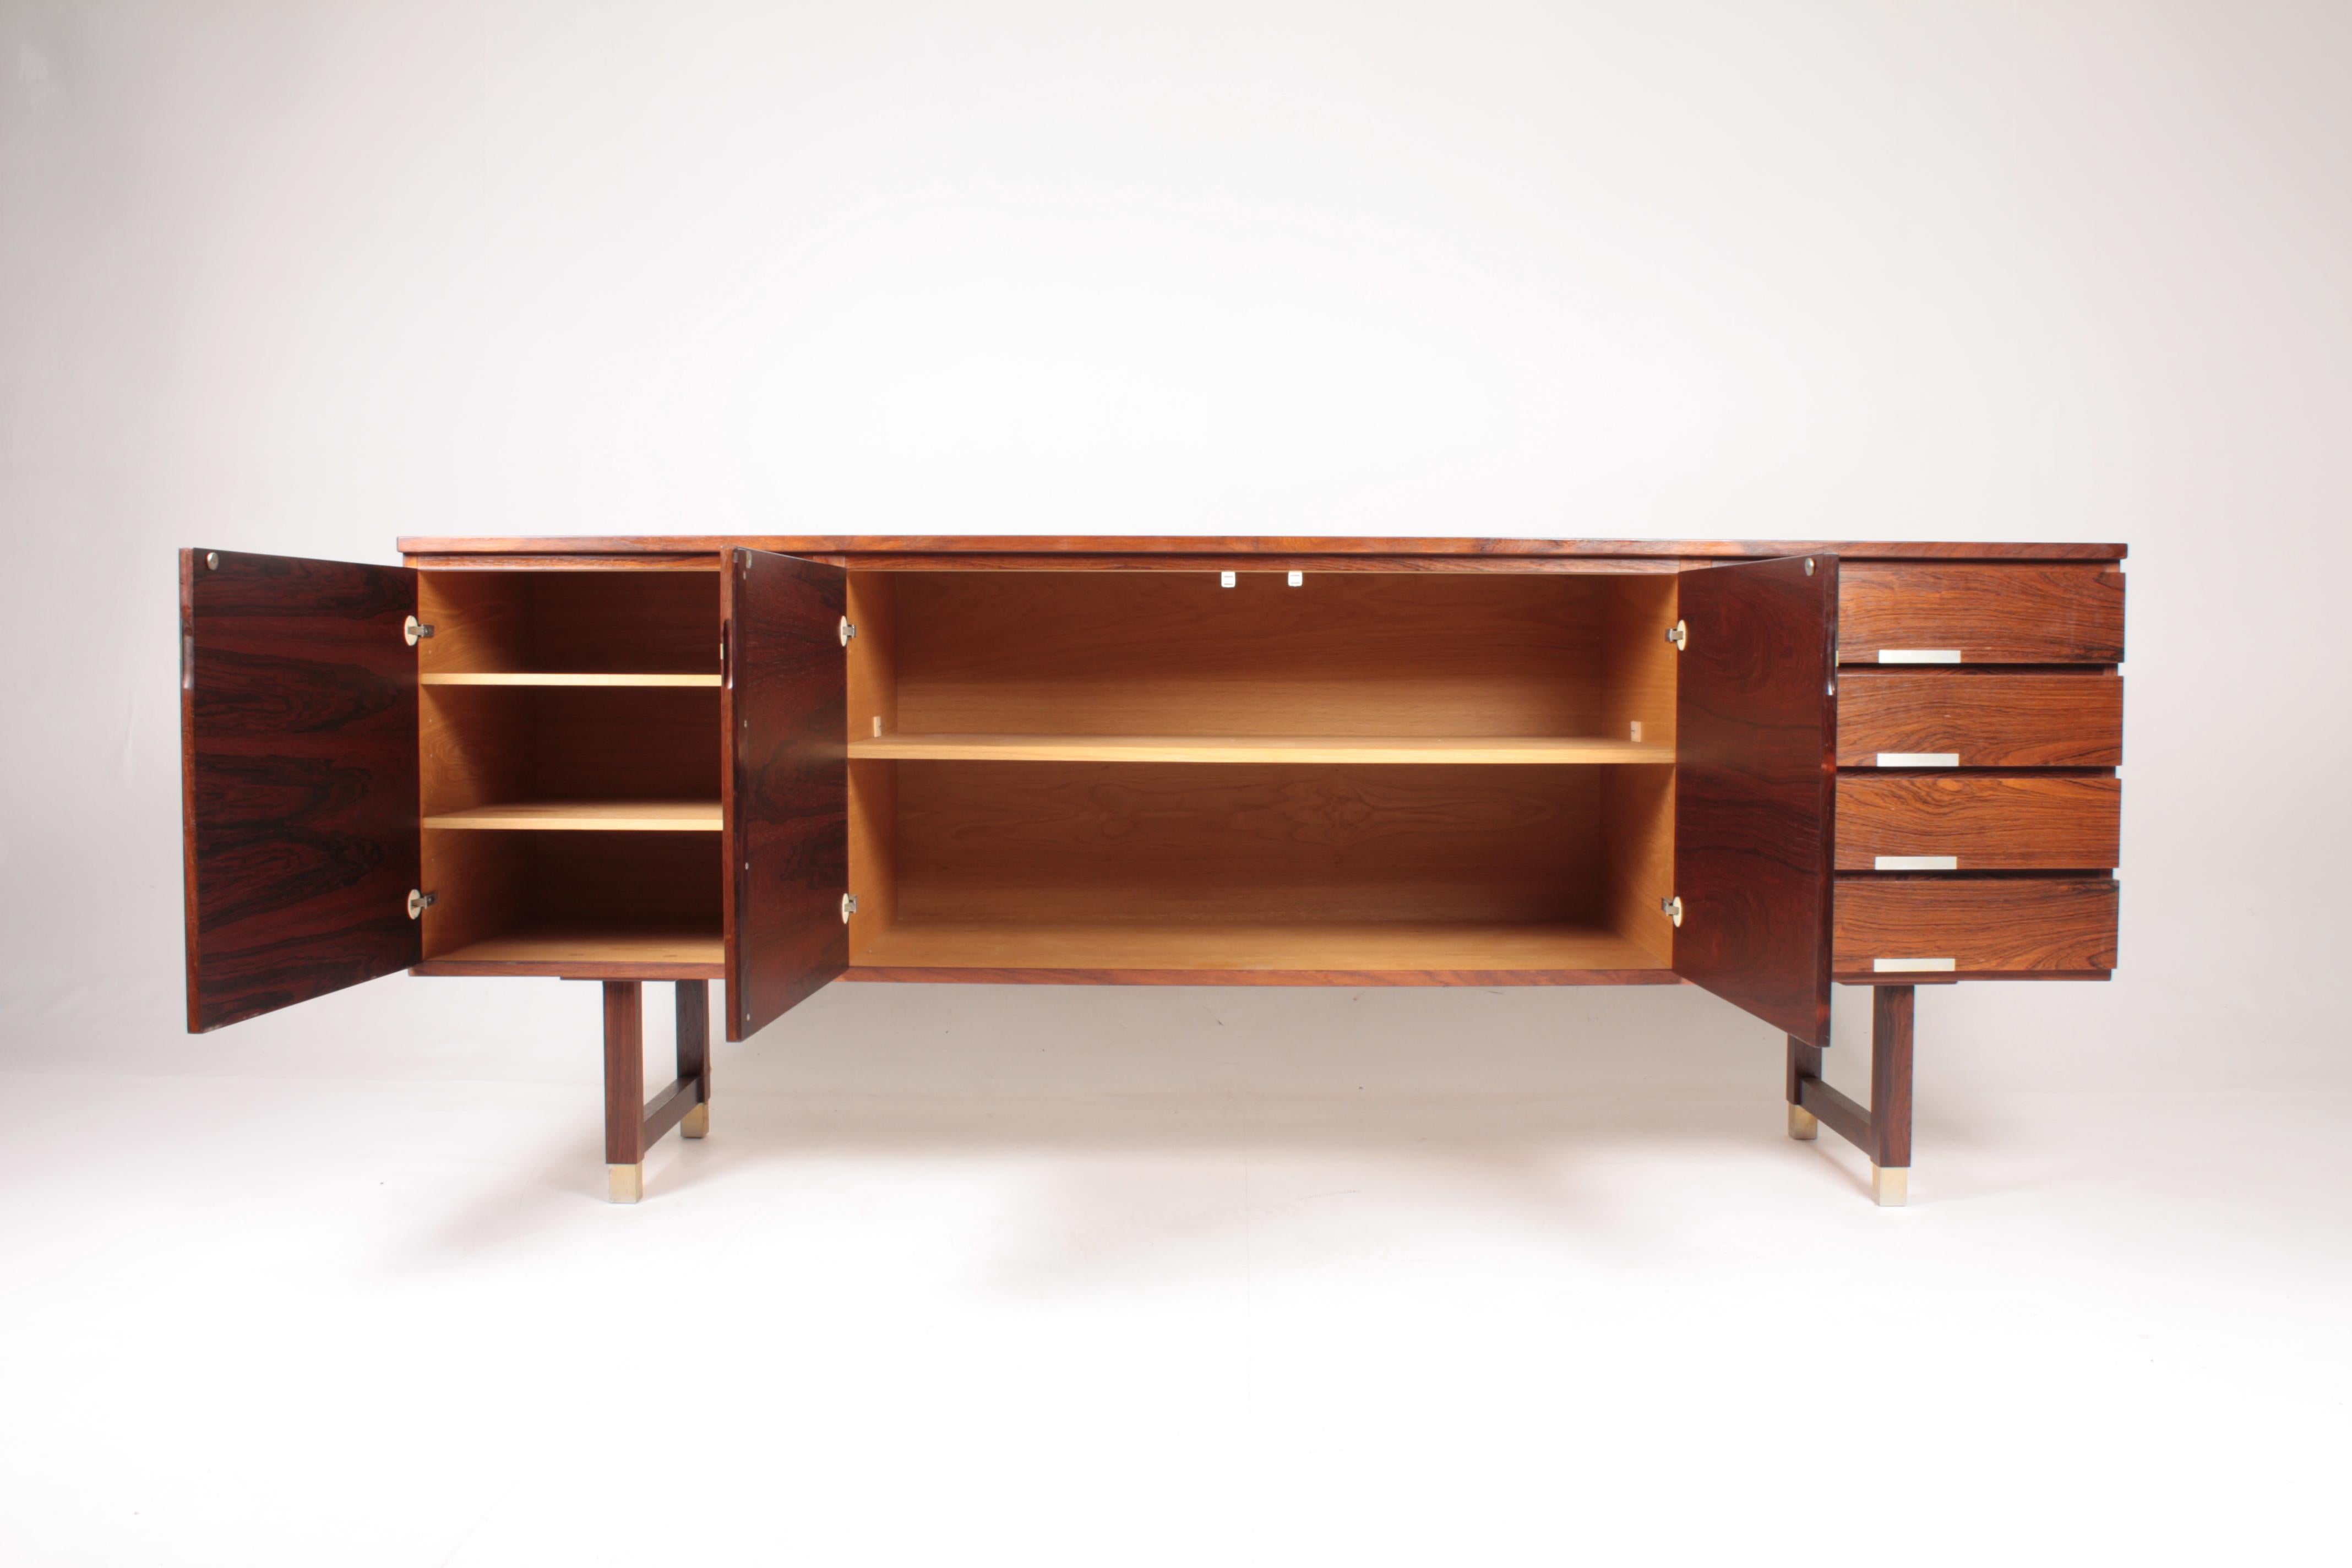 Mid-20th Century Midcentury Low Sideboard in Rosewood, Designed by Ejgil Petersen, 1960s For Sale